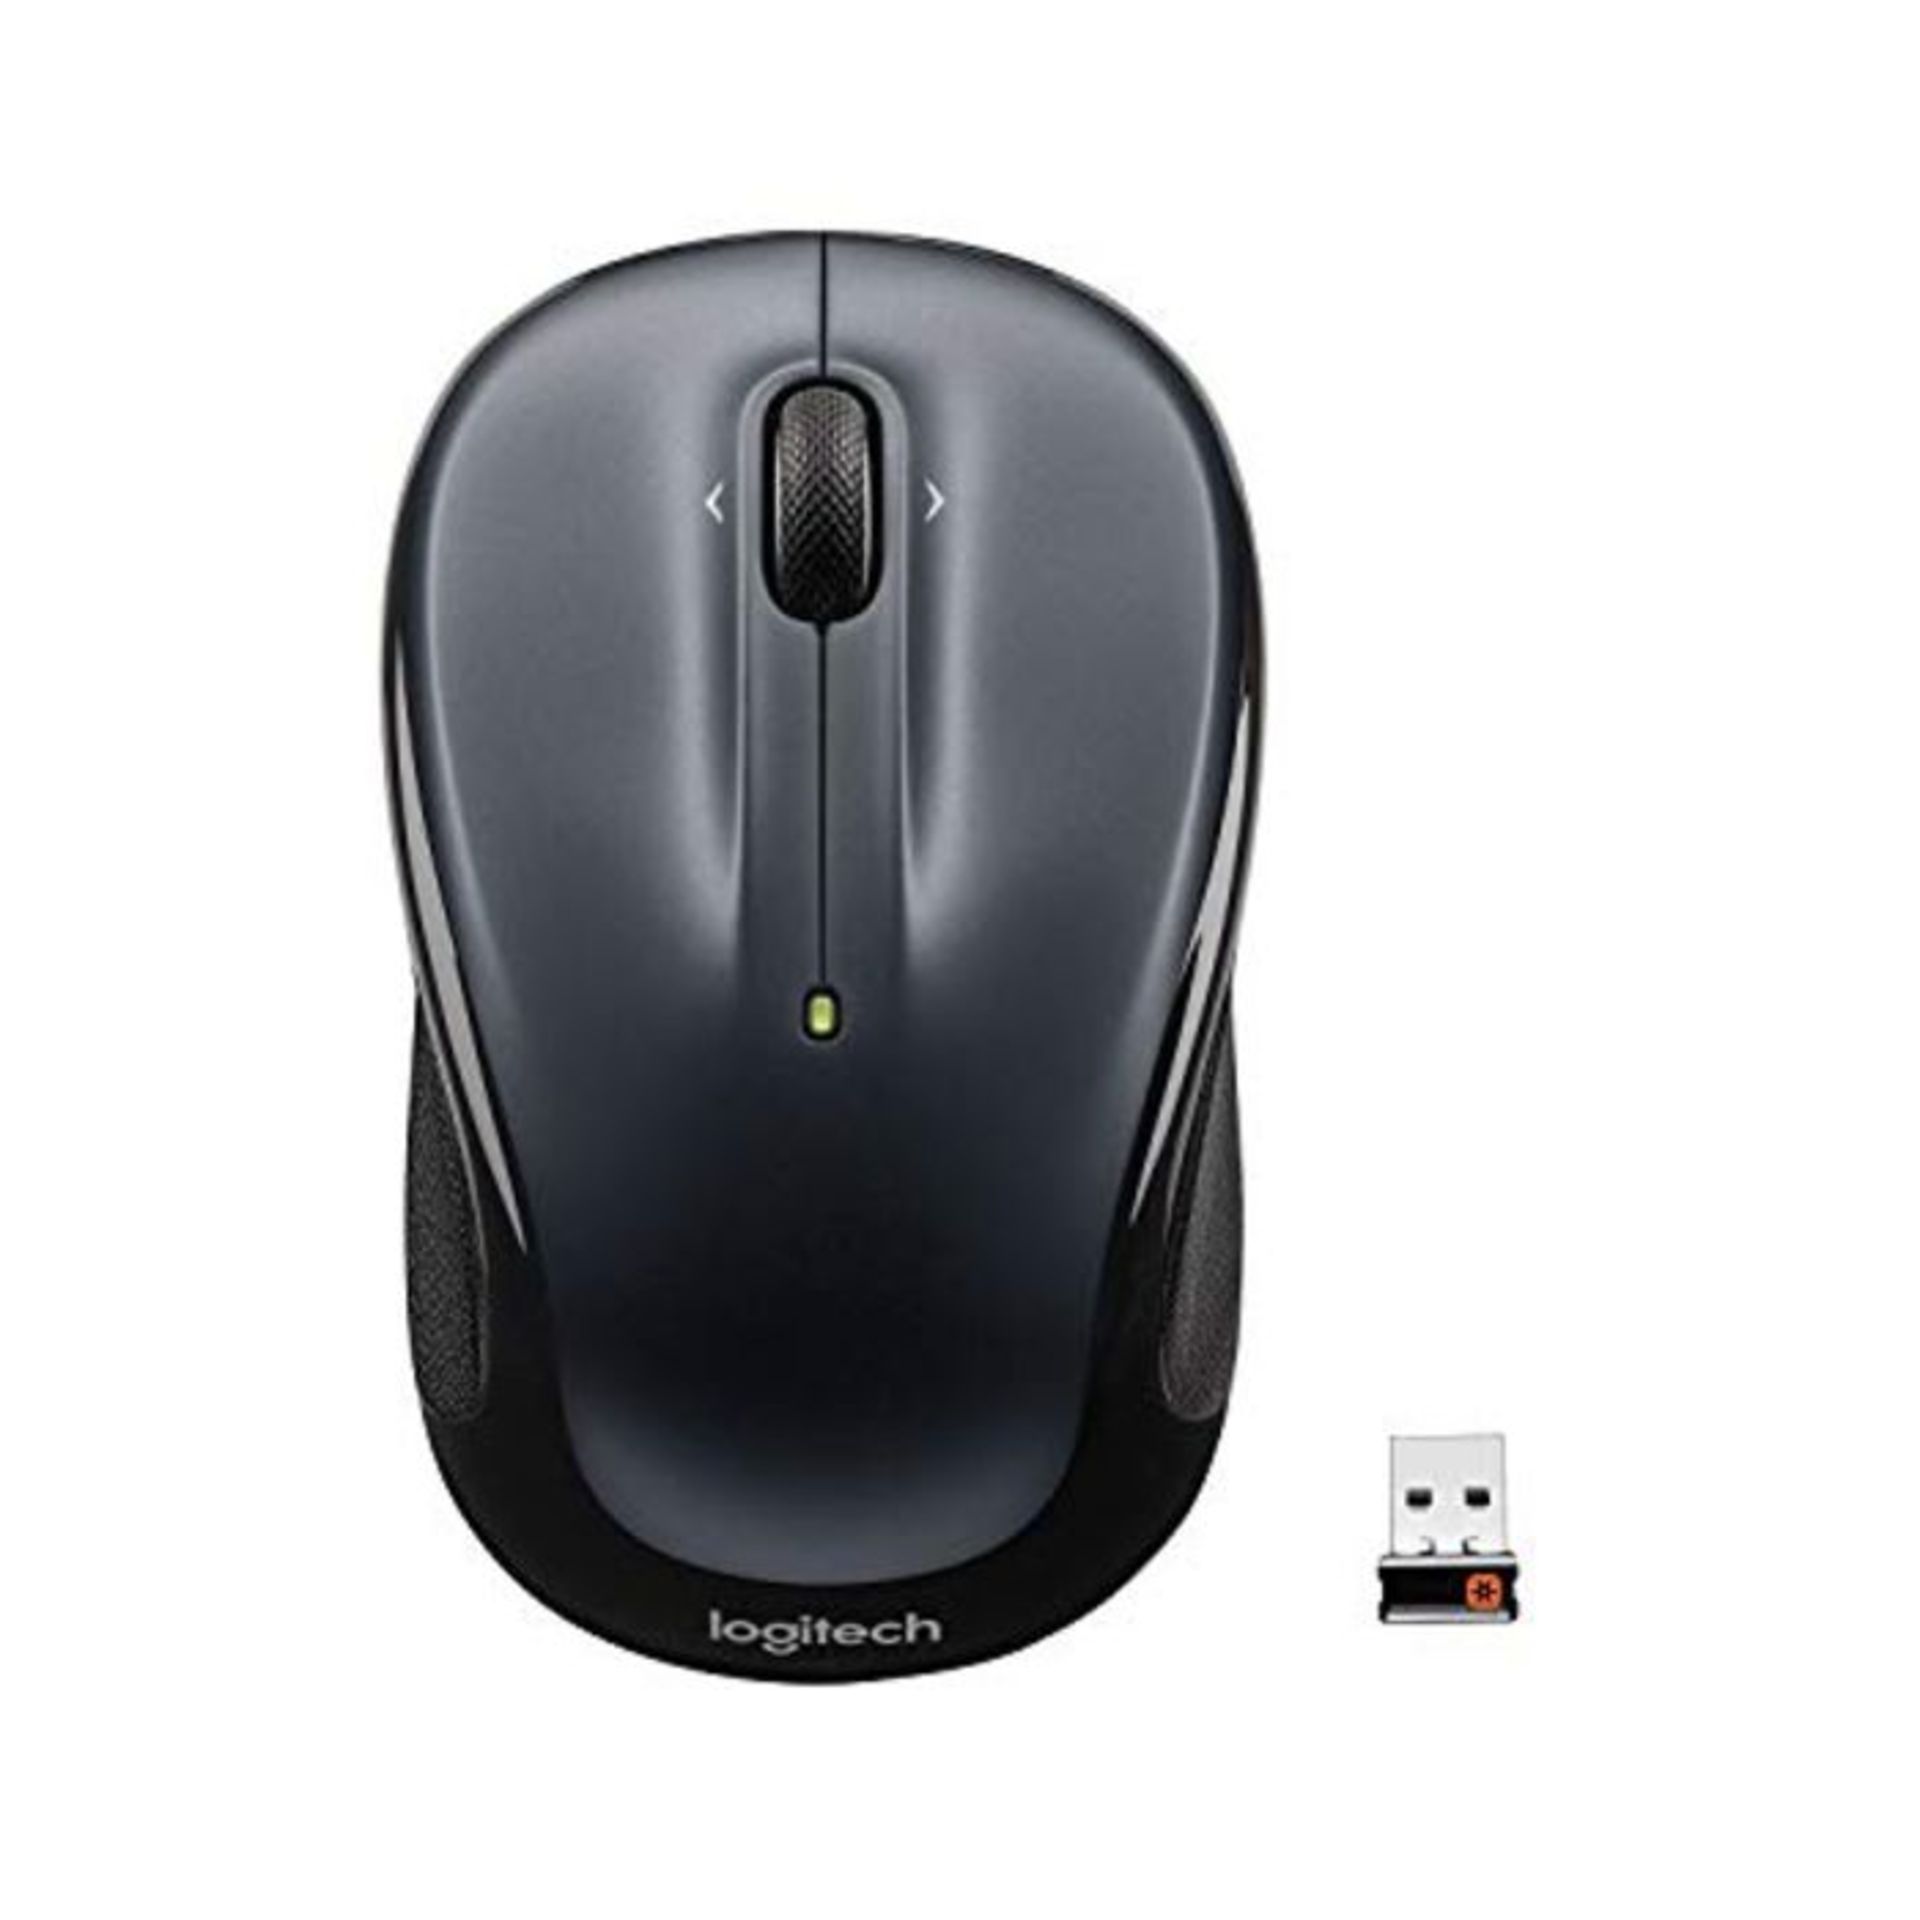 Logitech M325 Wireless Mouse, 2.4 GHz with USB Unifying Receiver, 1000 DPI Optical Tra